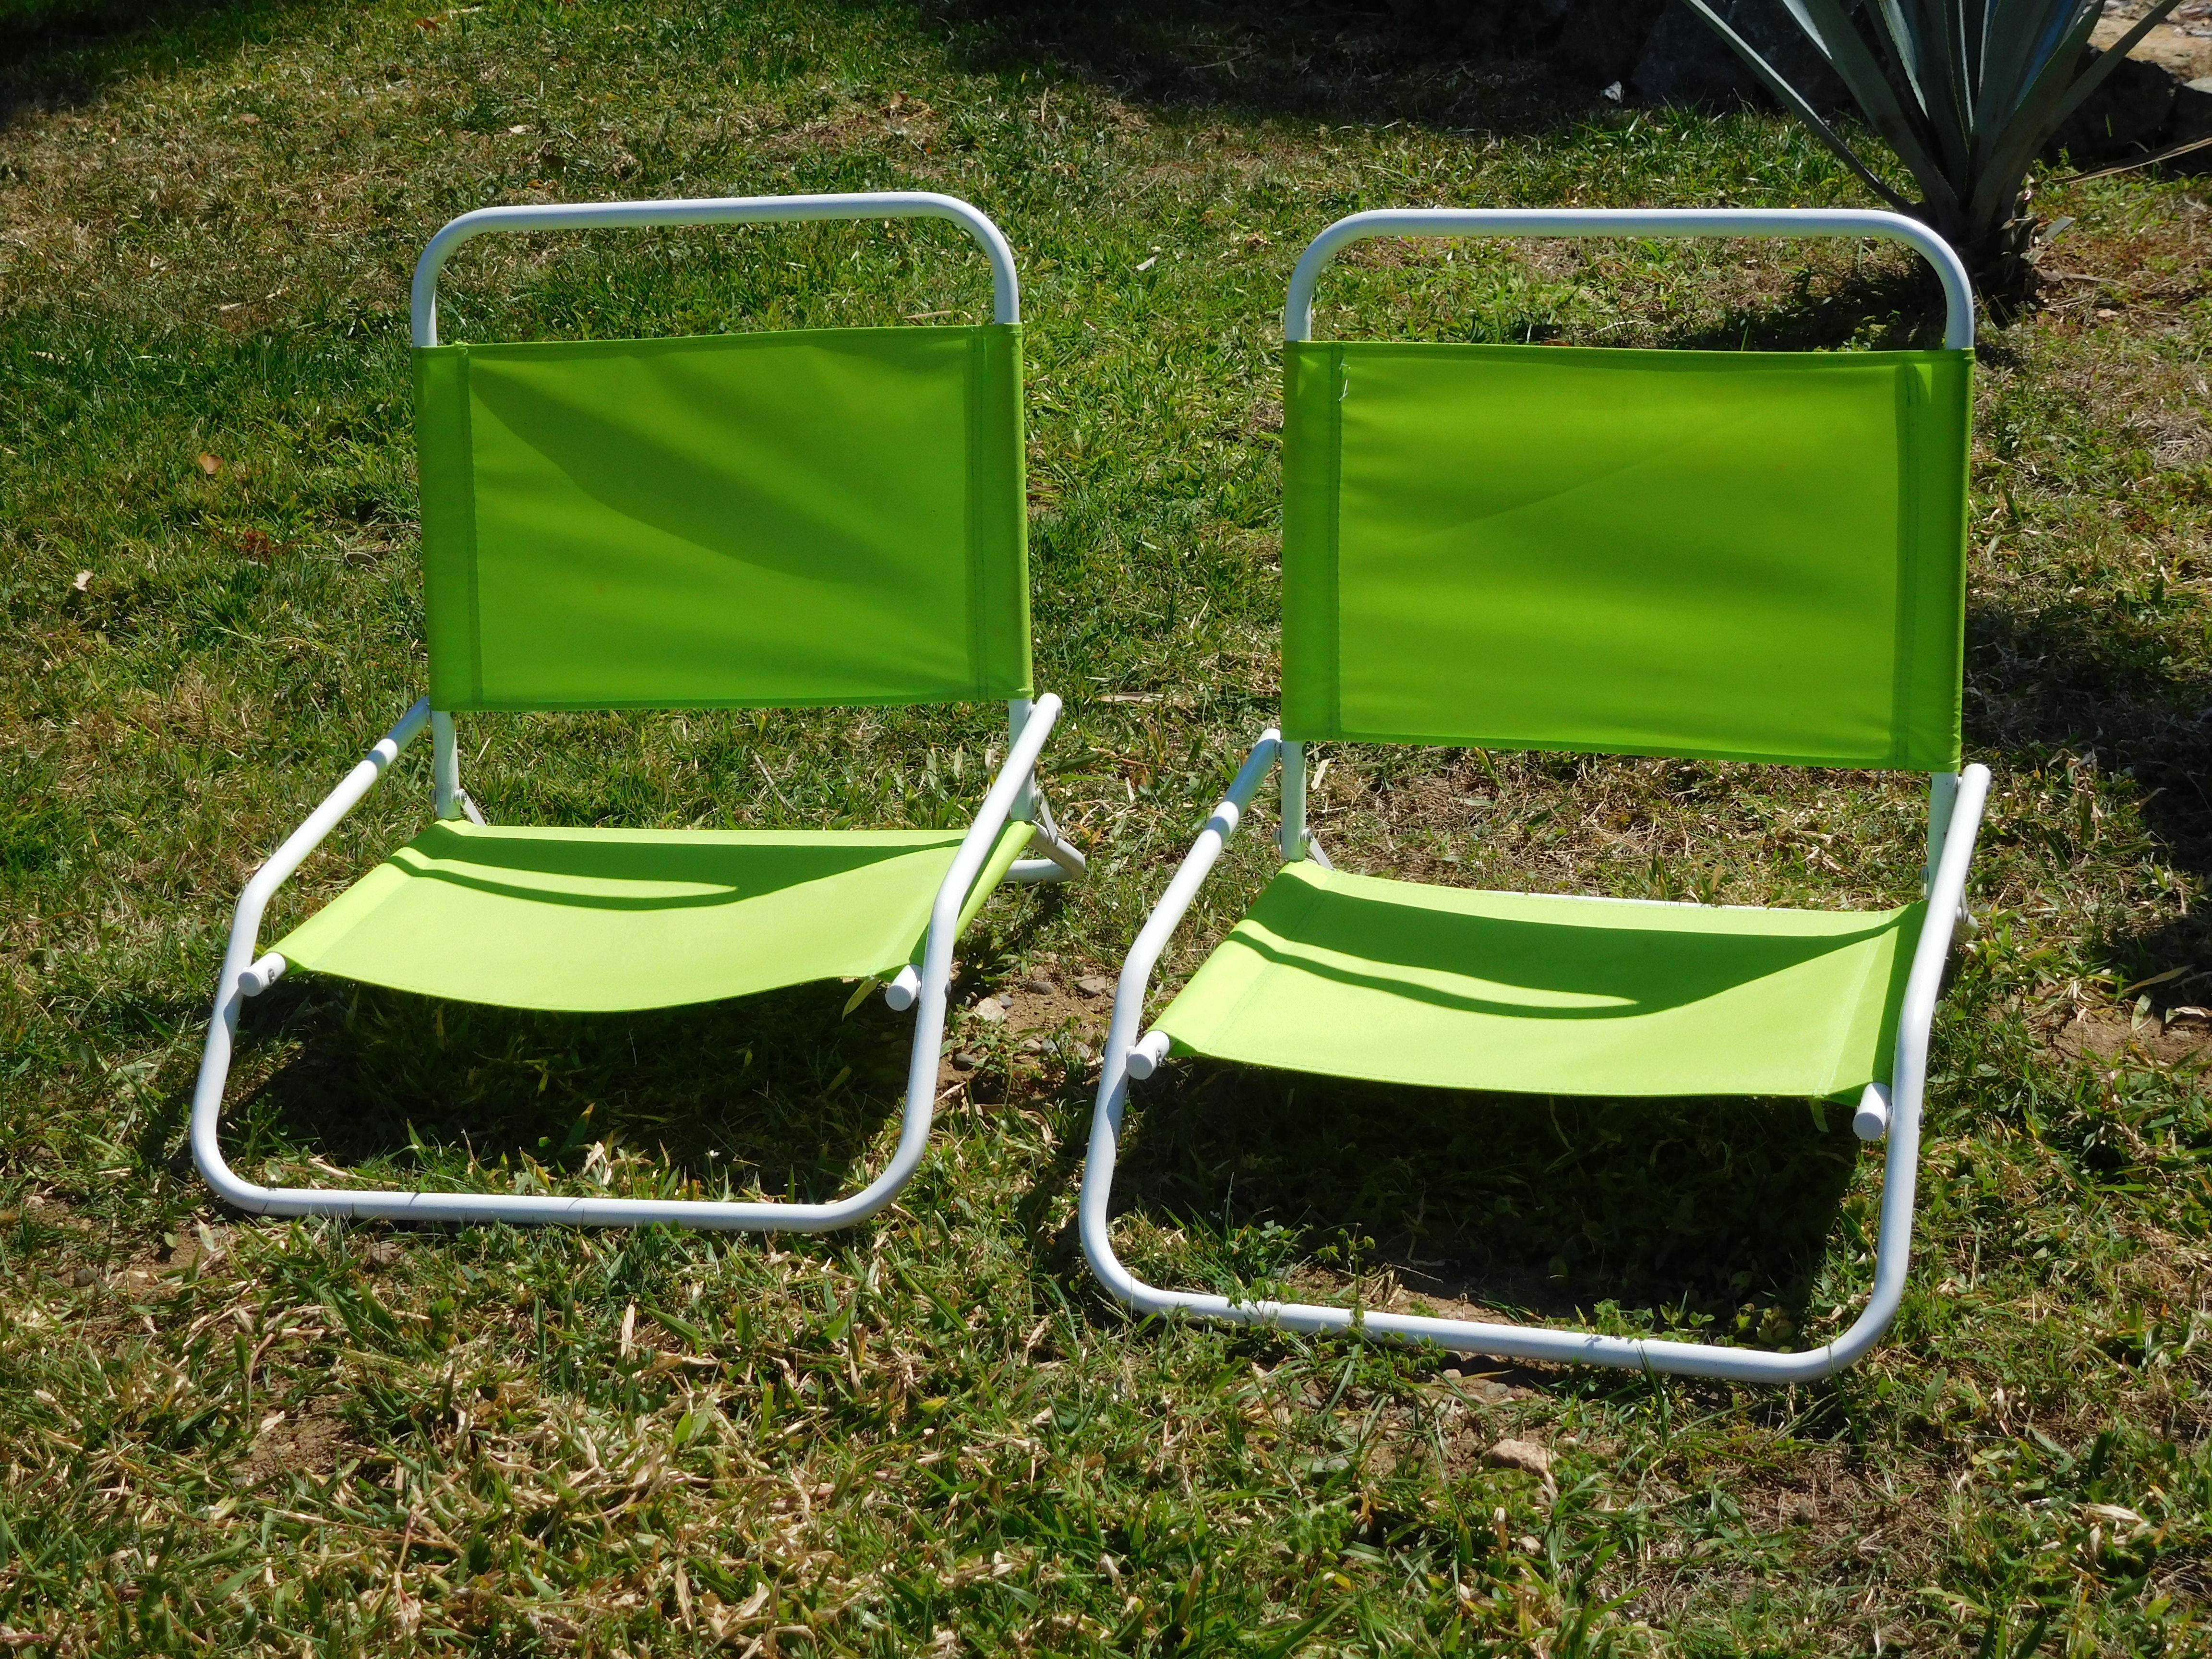 The beach chairs they provided when there wasn't any. On the listing said nice beach chairs